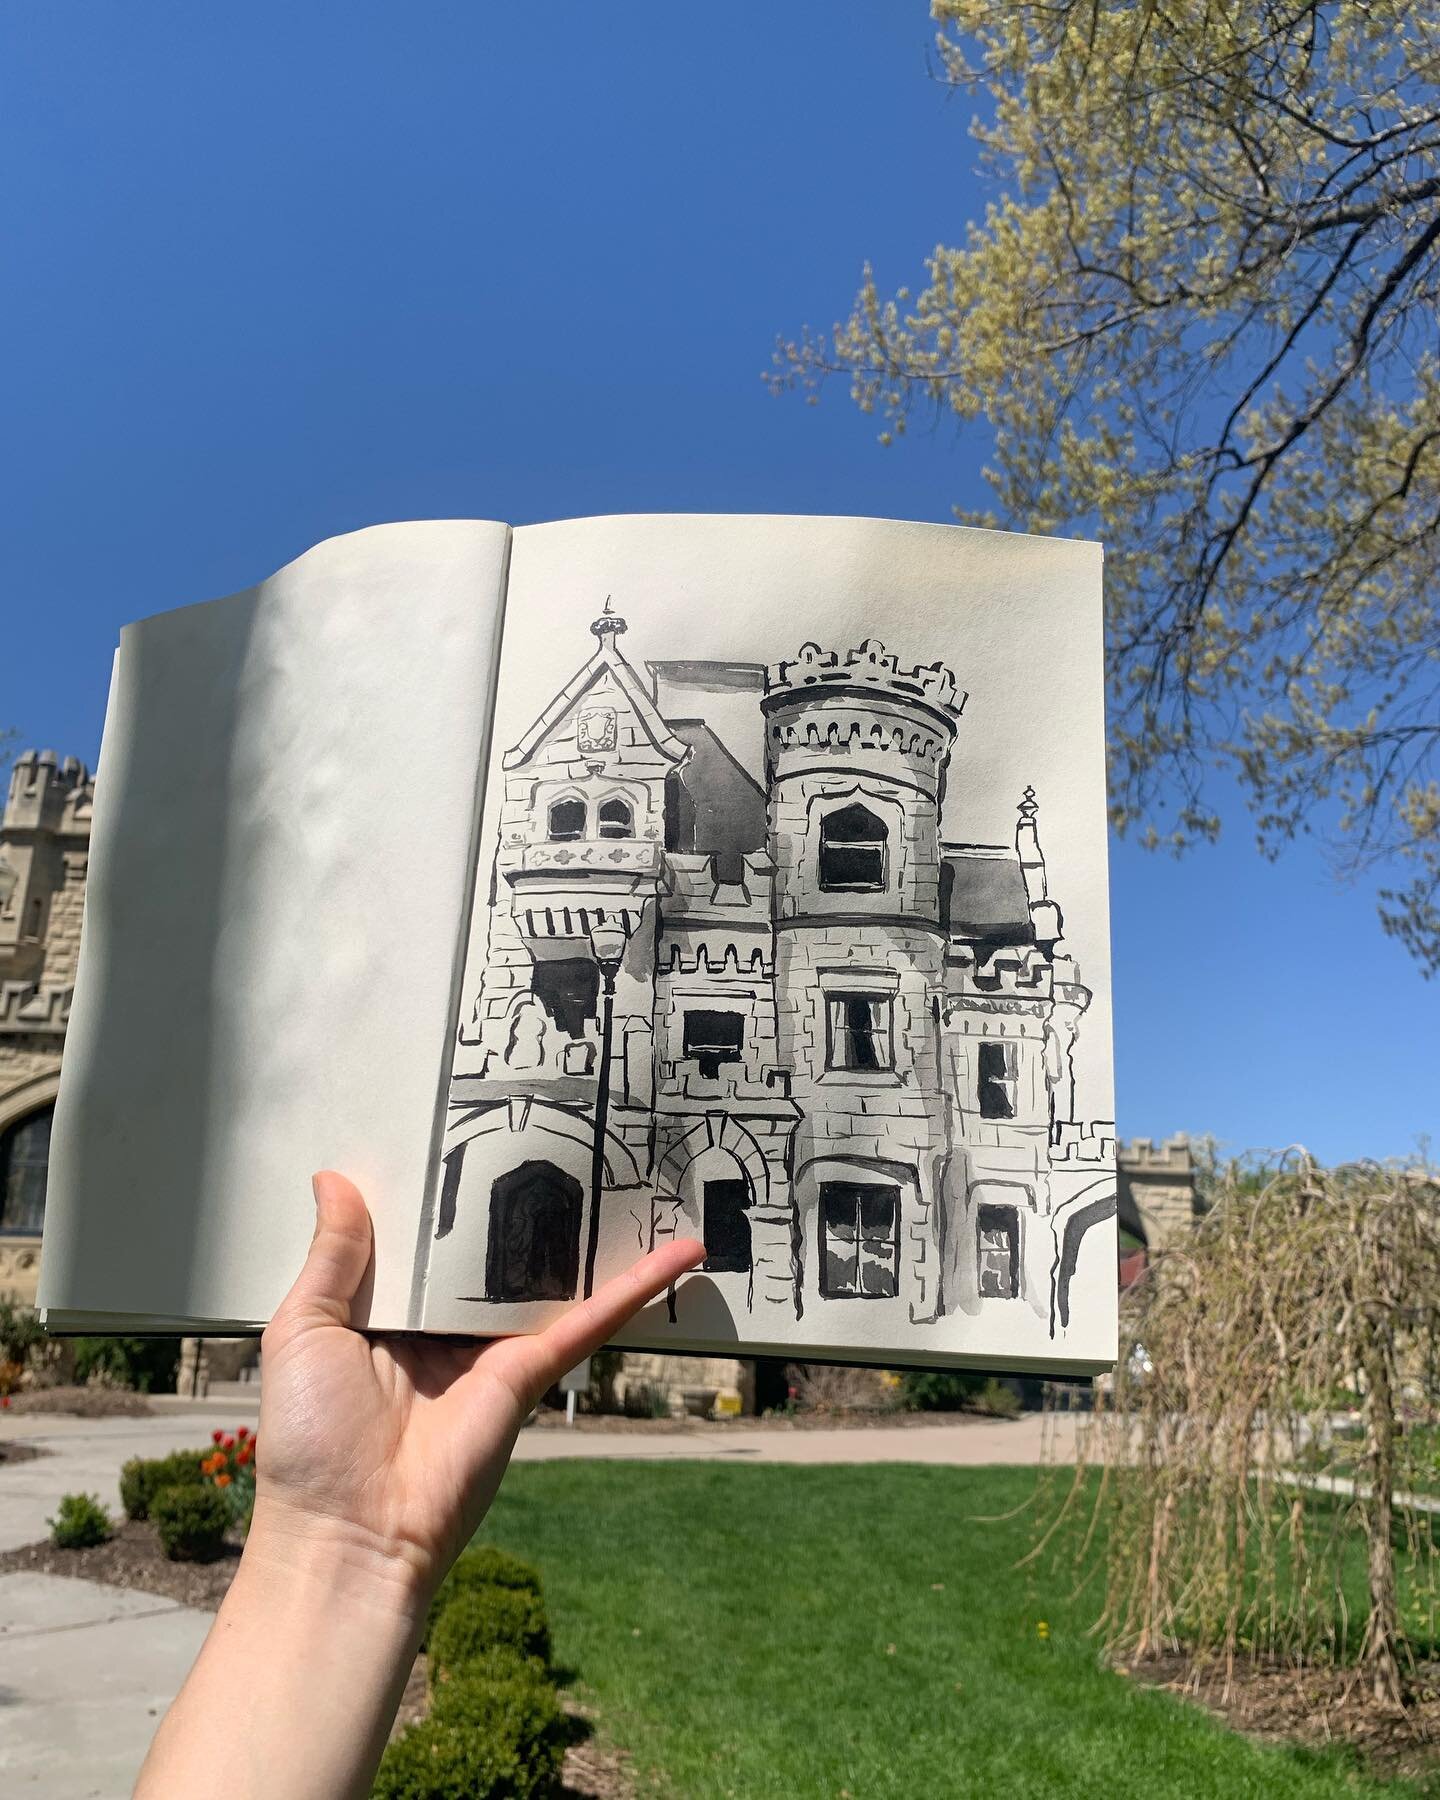 An afternoon of painting at the castle 💕🏰🌷

#makeitmay23 #joslyncastle #castlepainting #sumiink #inkpainting #sketchbookpainting #buildingpainting